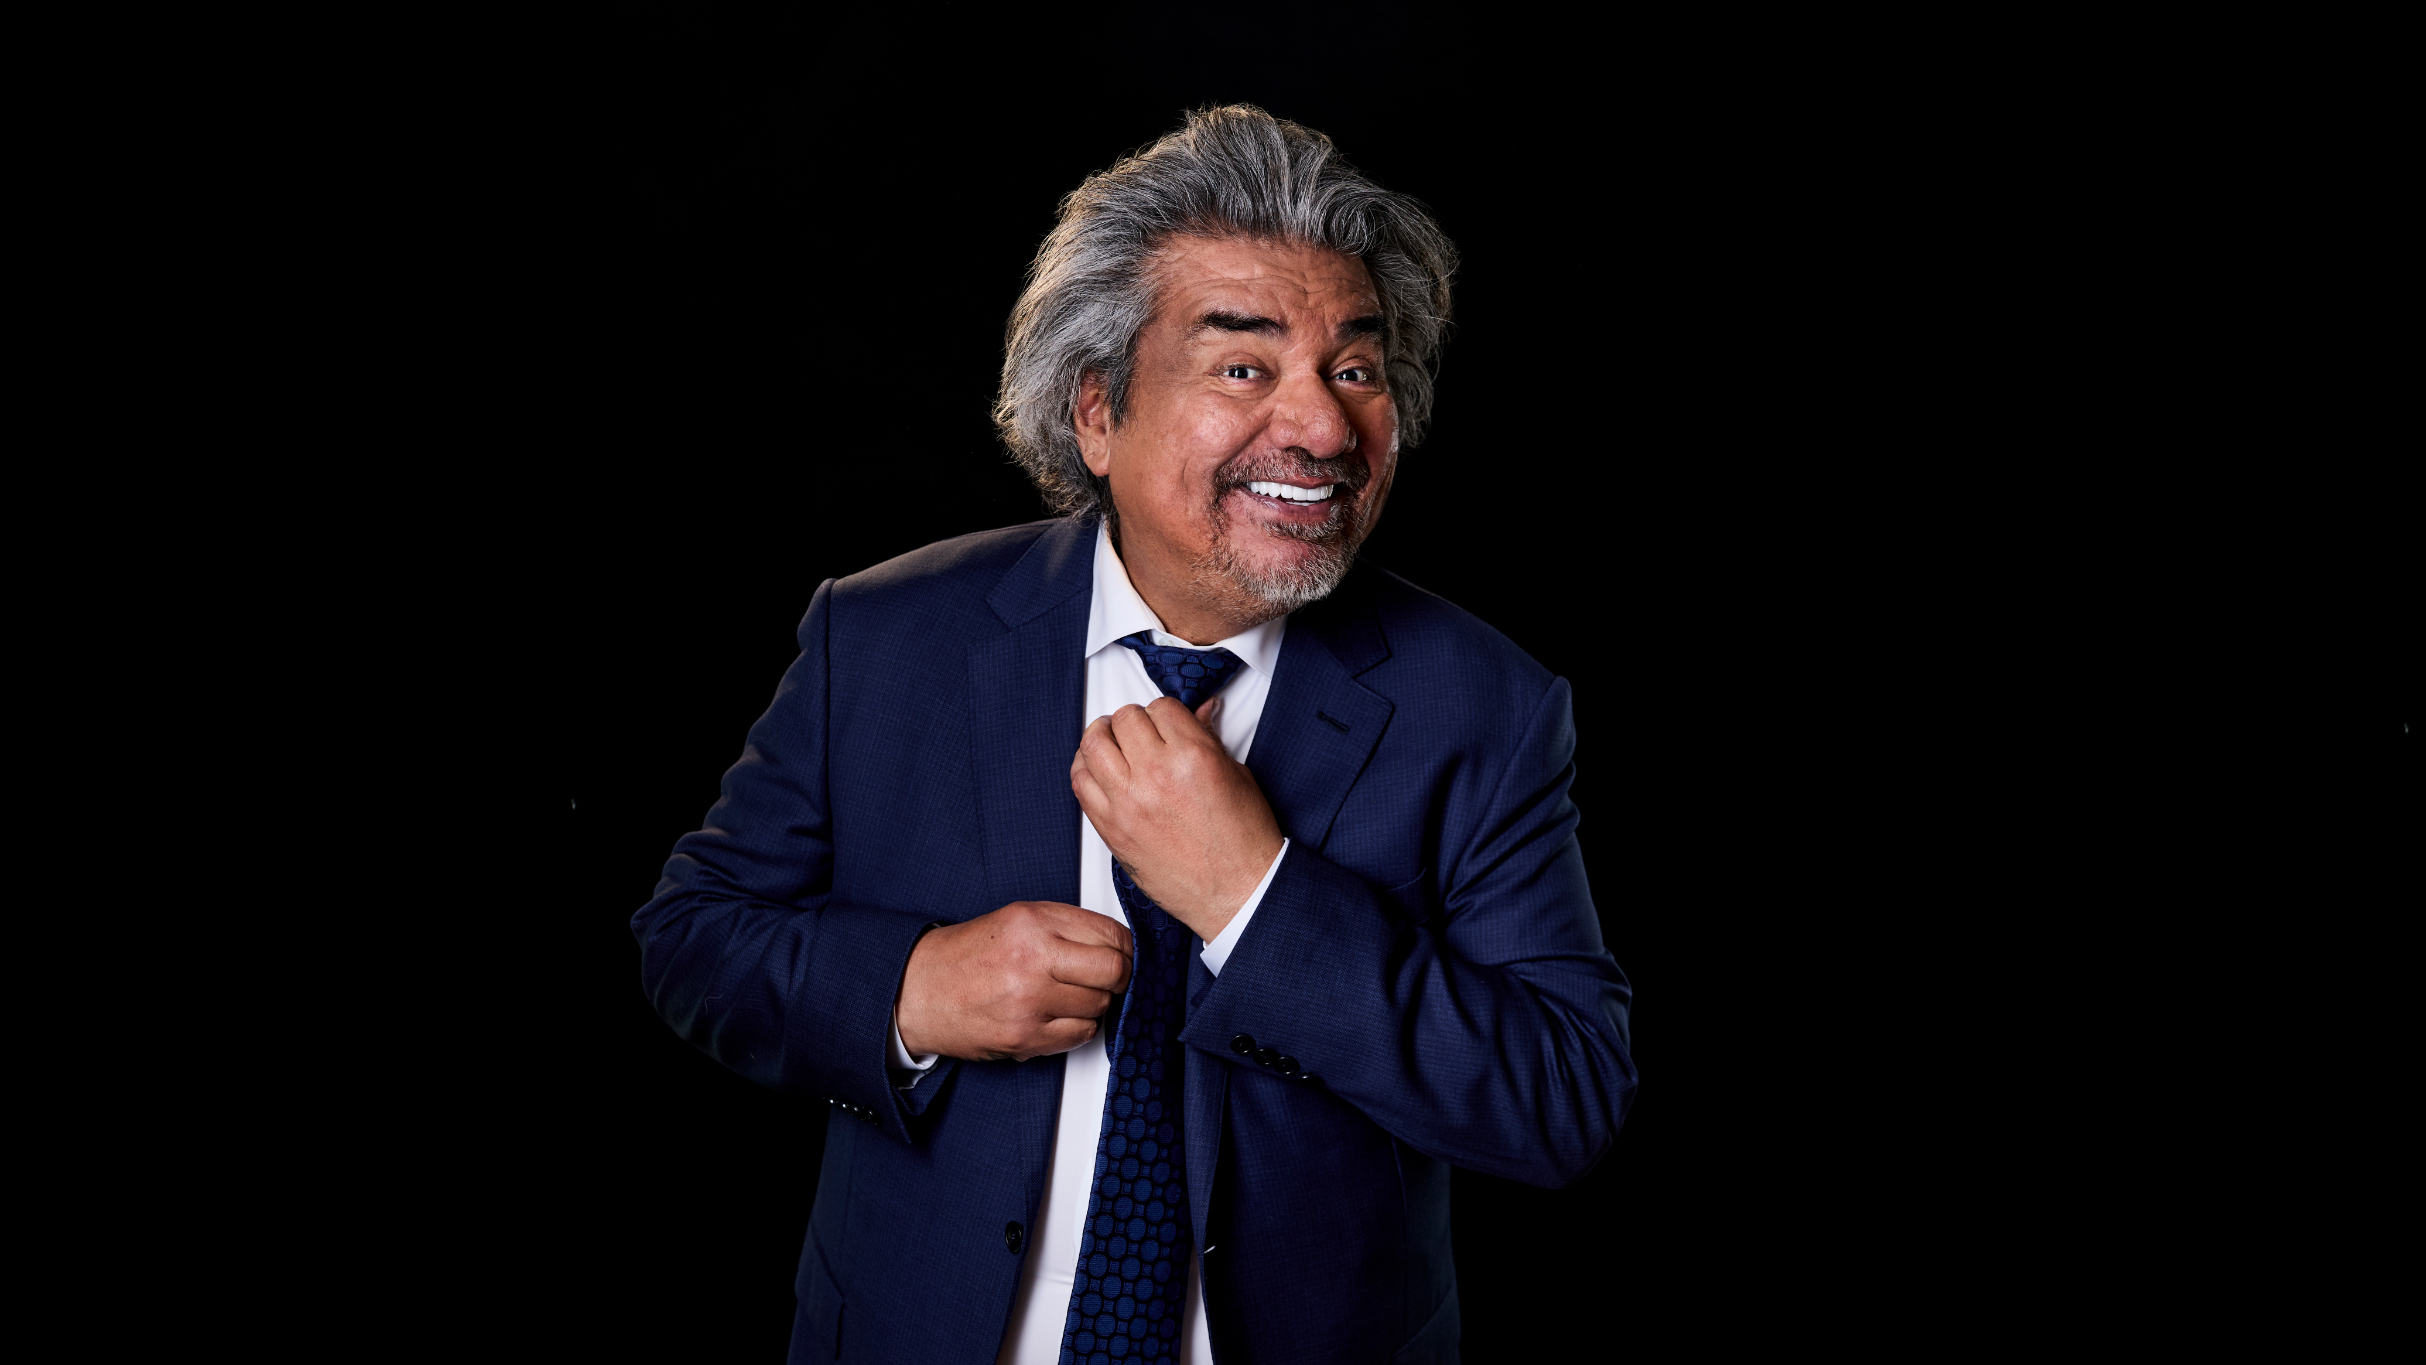 George Lopez: Alllriiiighhttt! in Hollywood promo photo for Official Platinum presale offer code